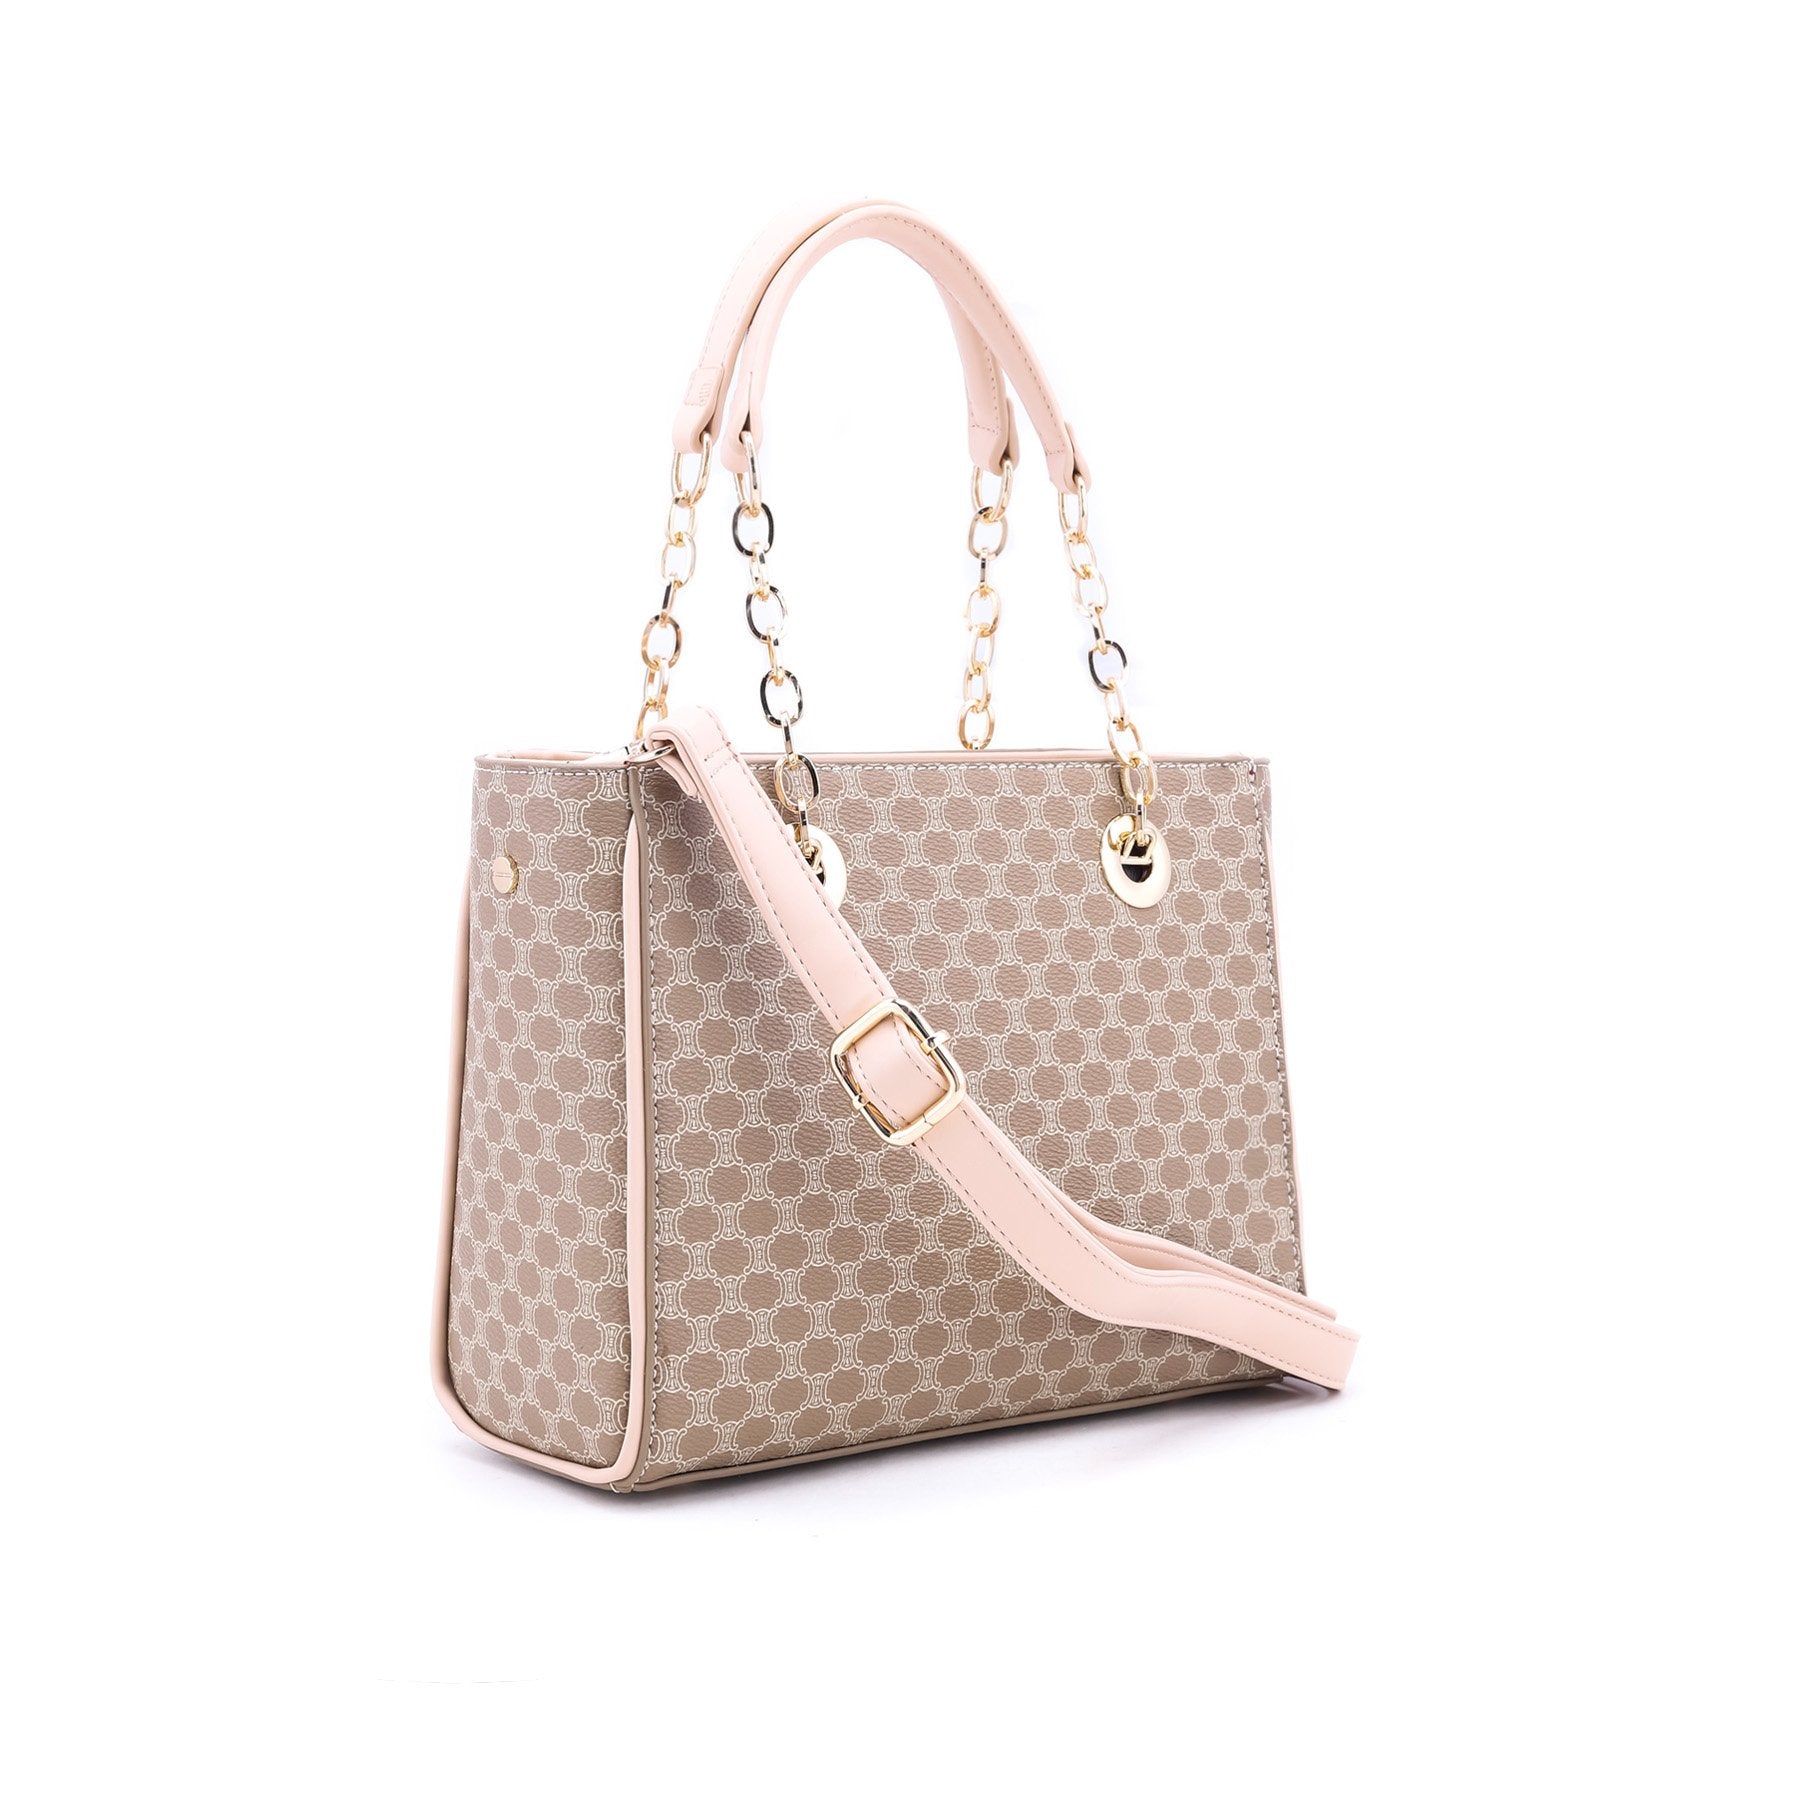 Fawn Color Formal Hand Bag P35001